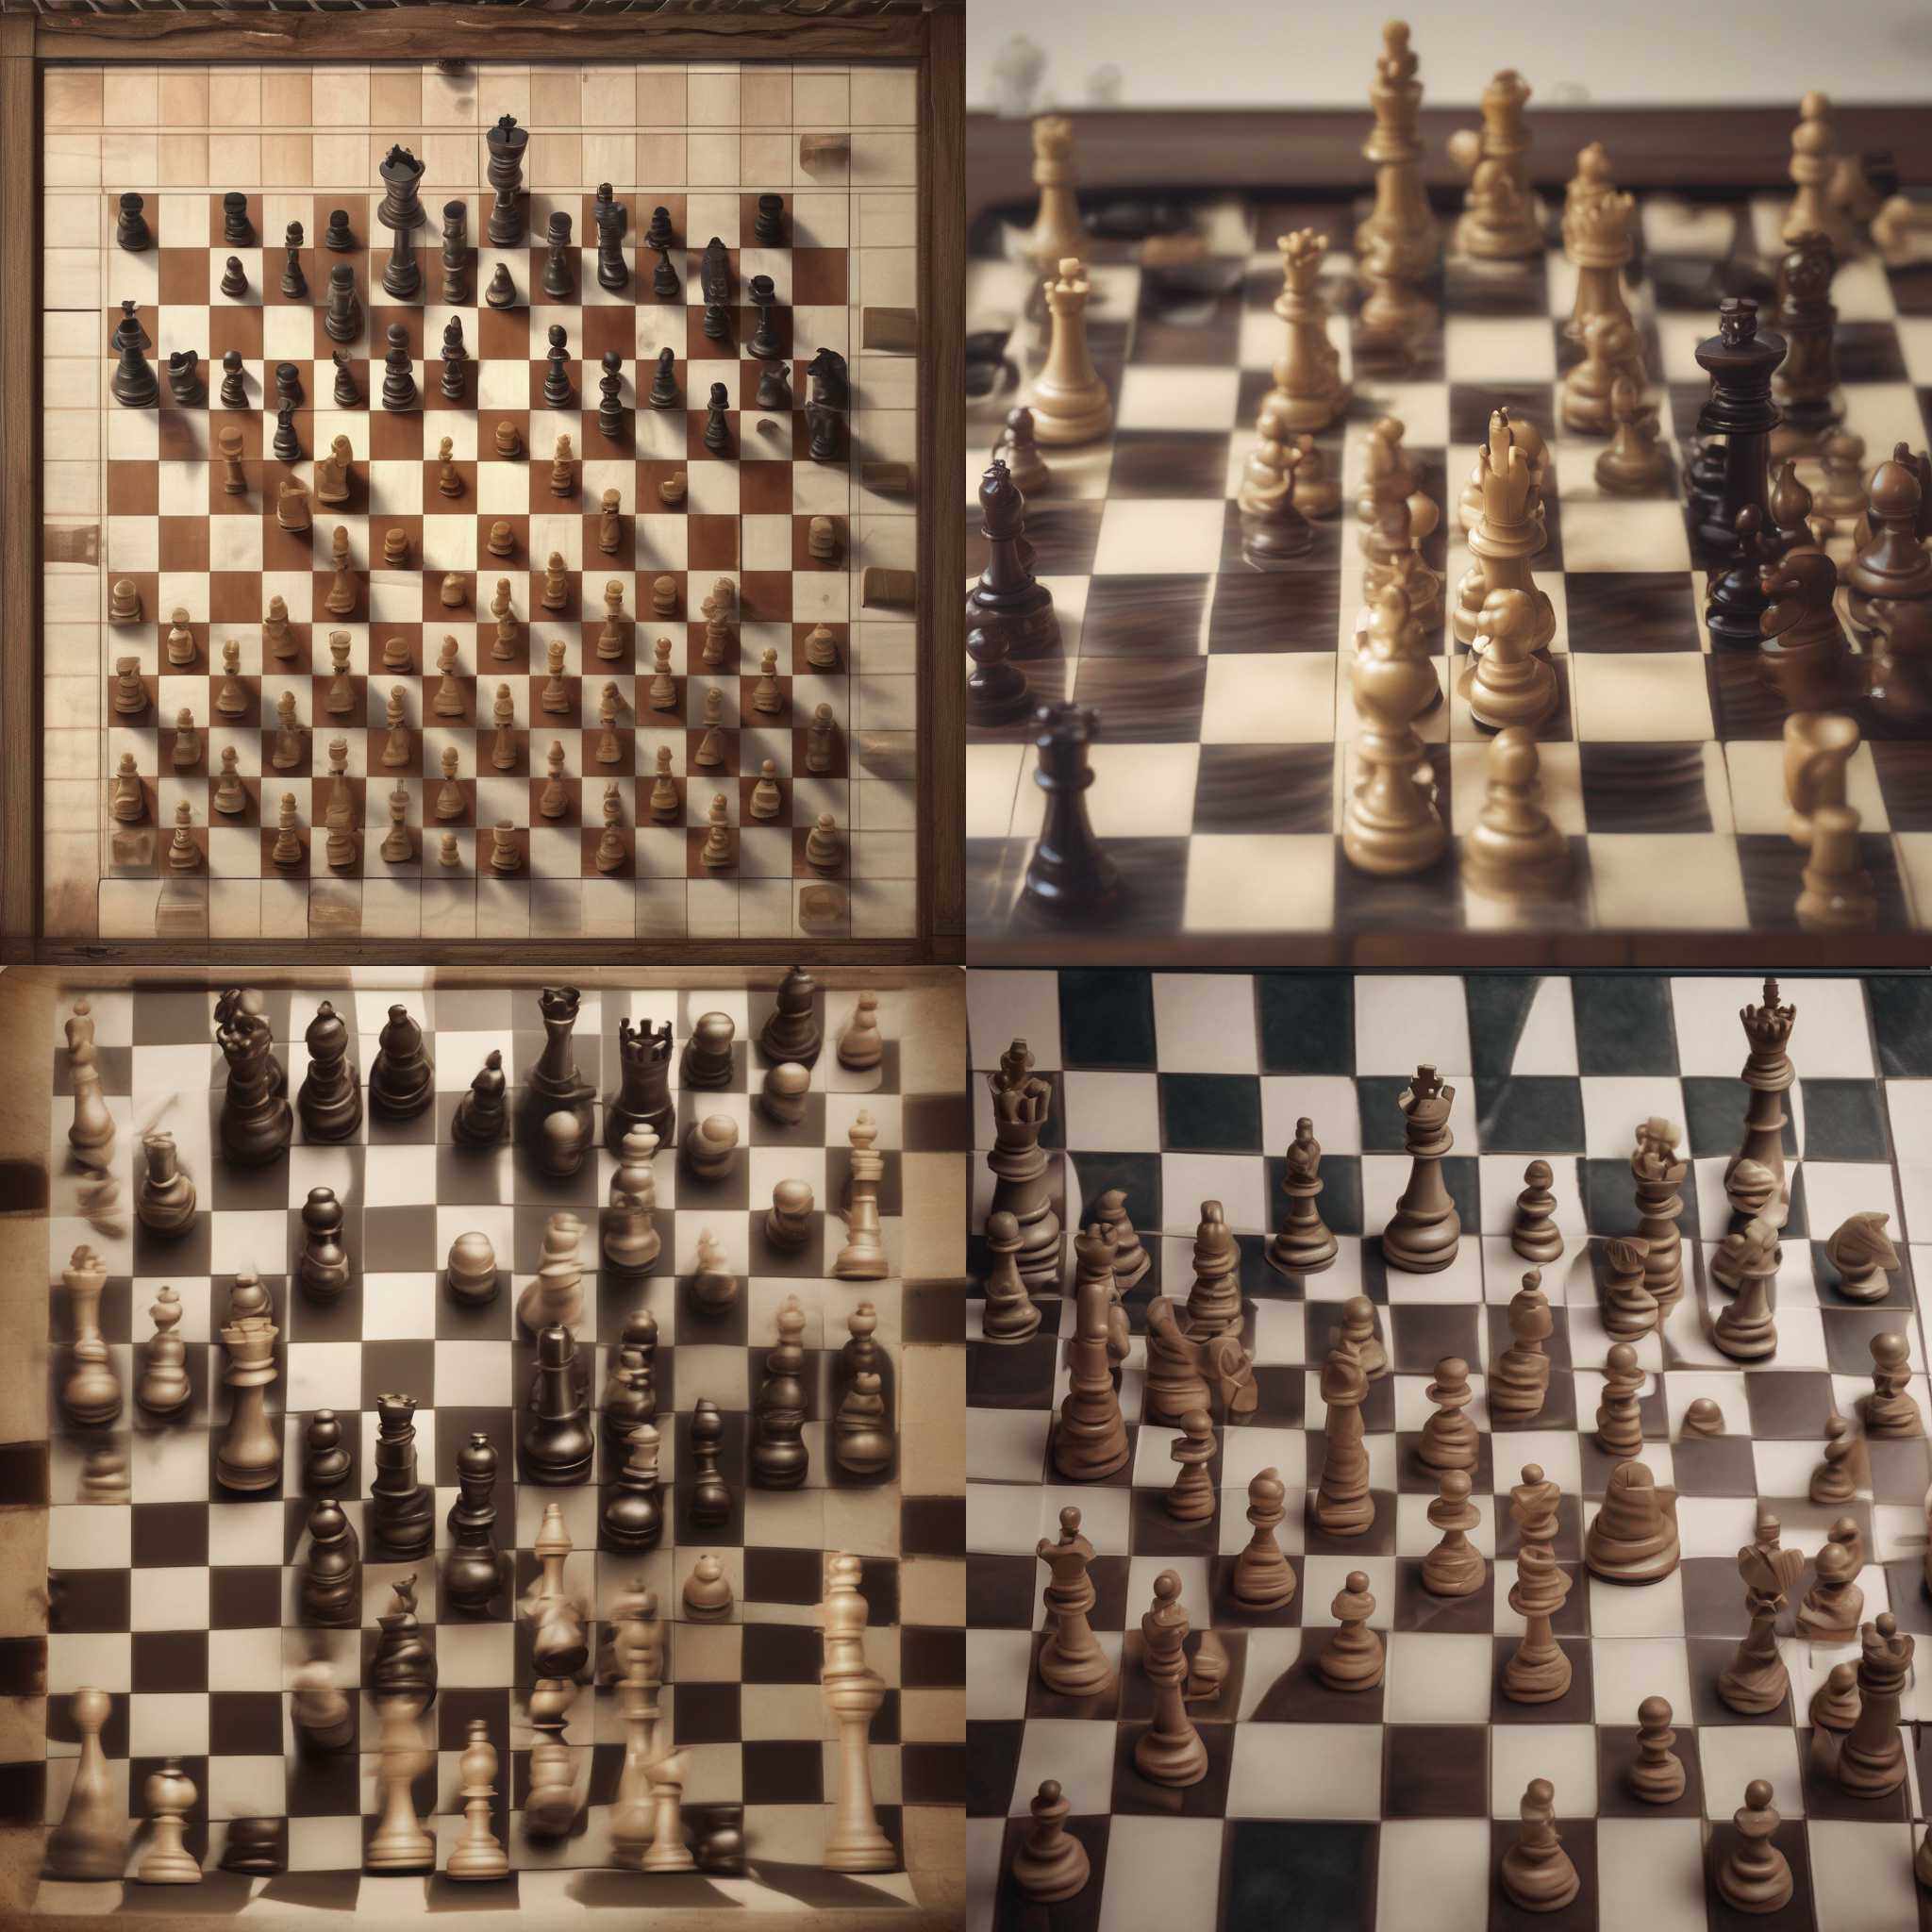 A chessboard at the beginning of a game